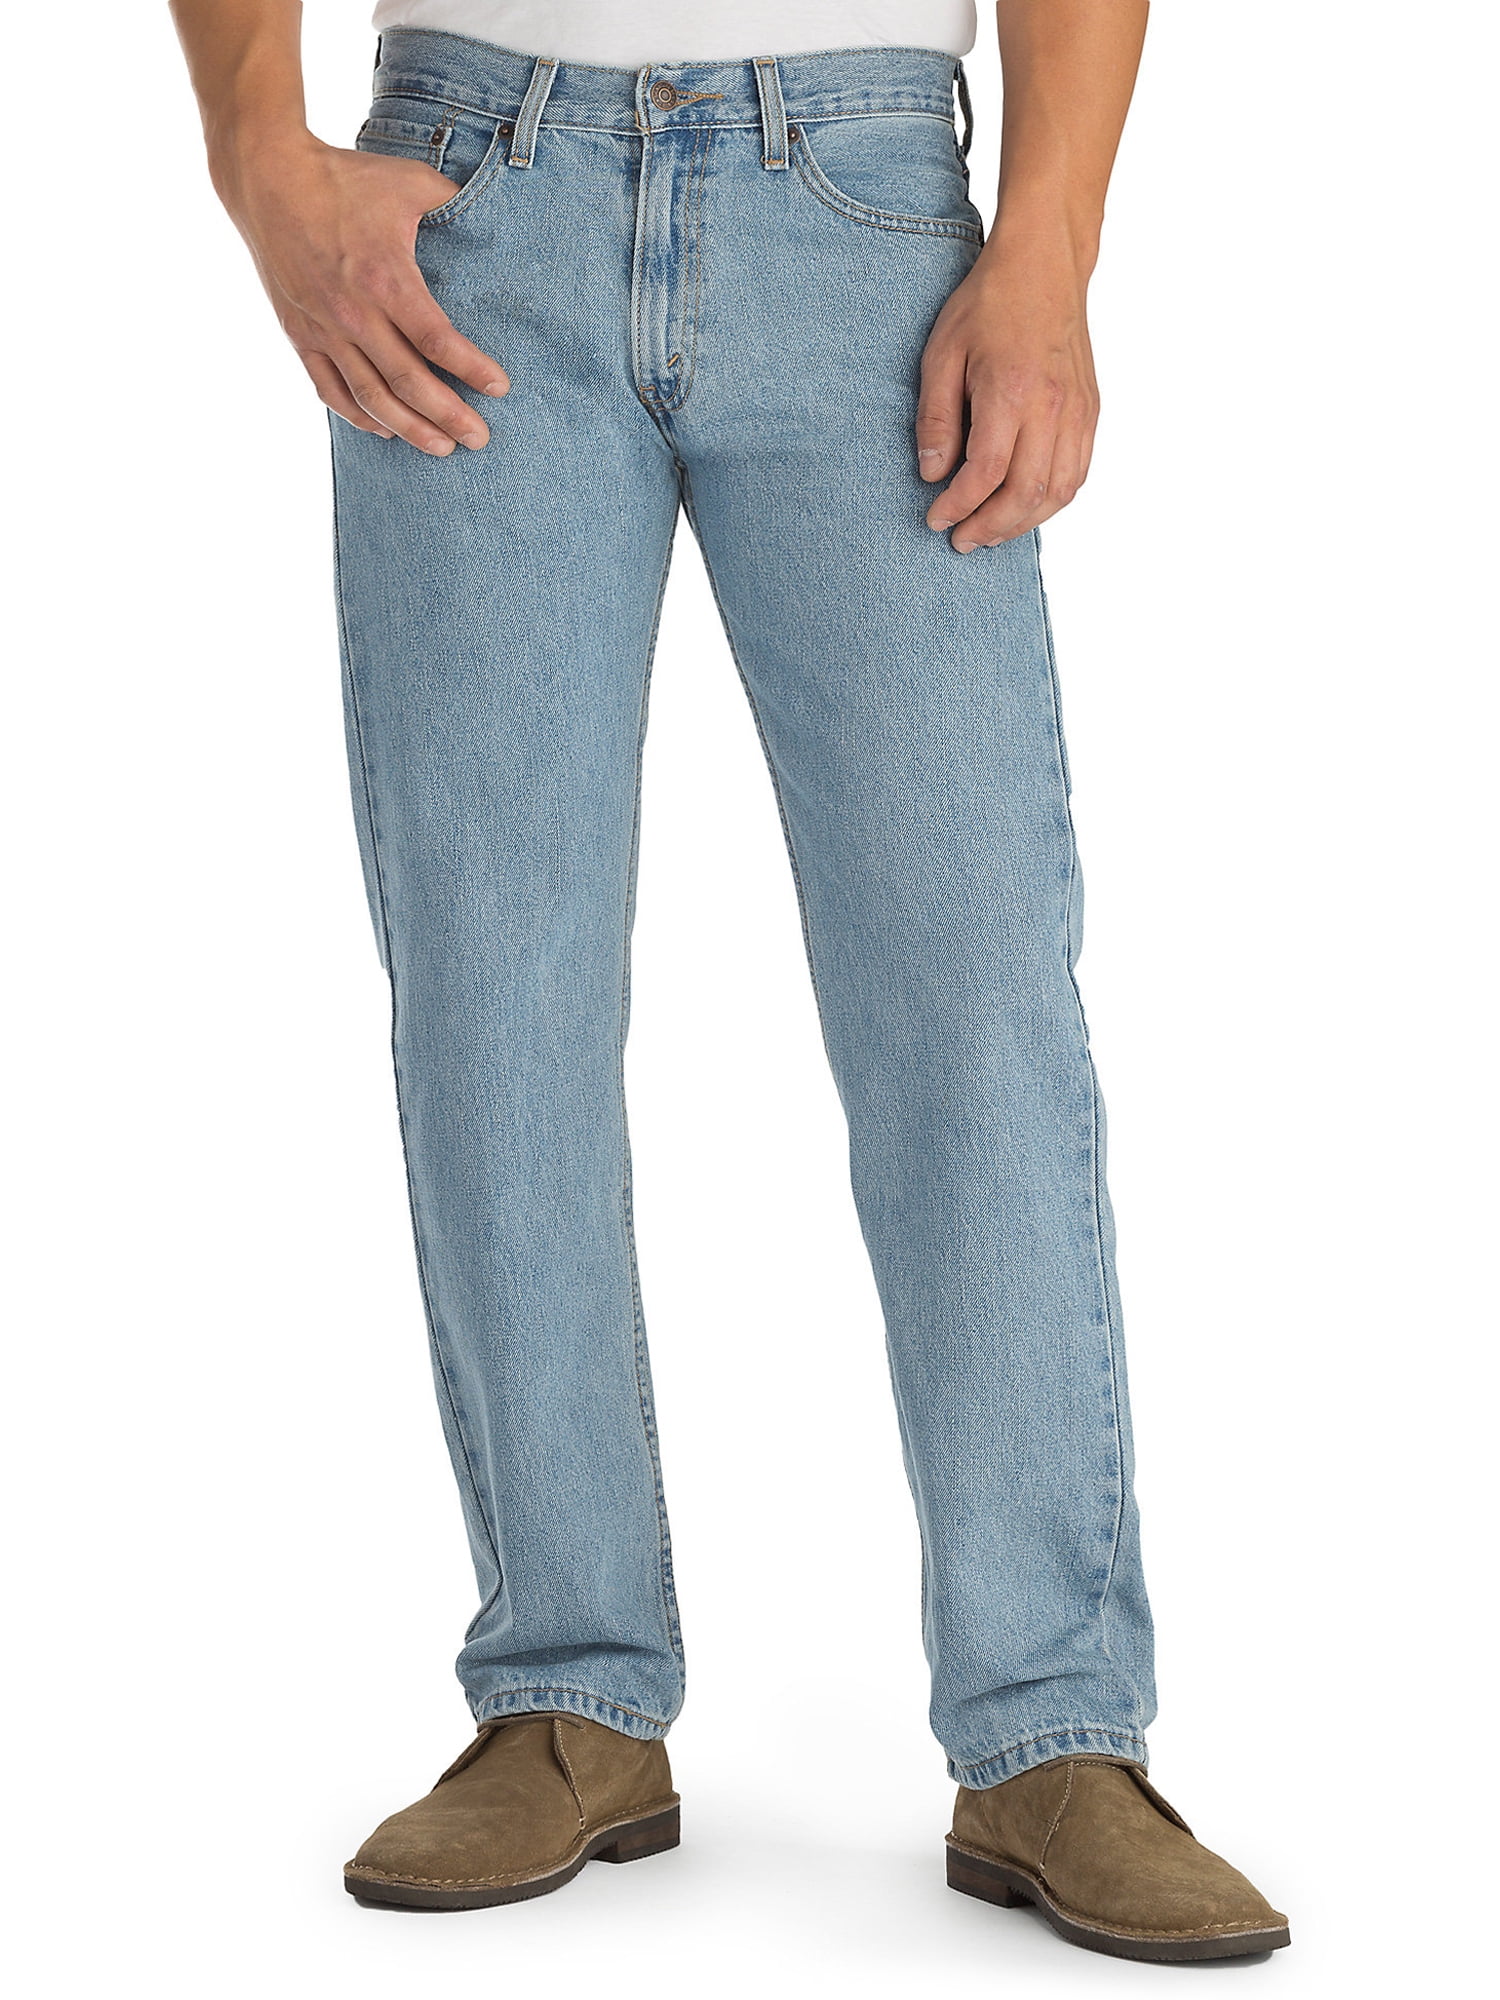 Signature by Levi Strauss & Co. Men\'s Regular Fit Jeans